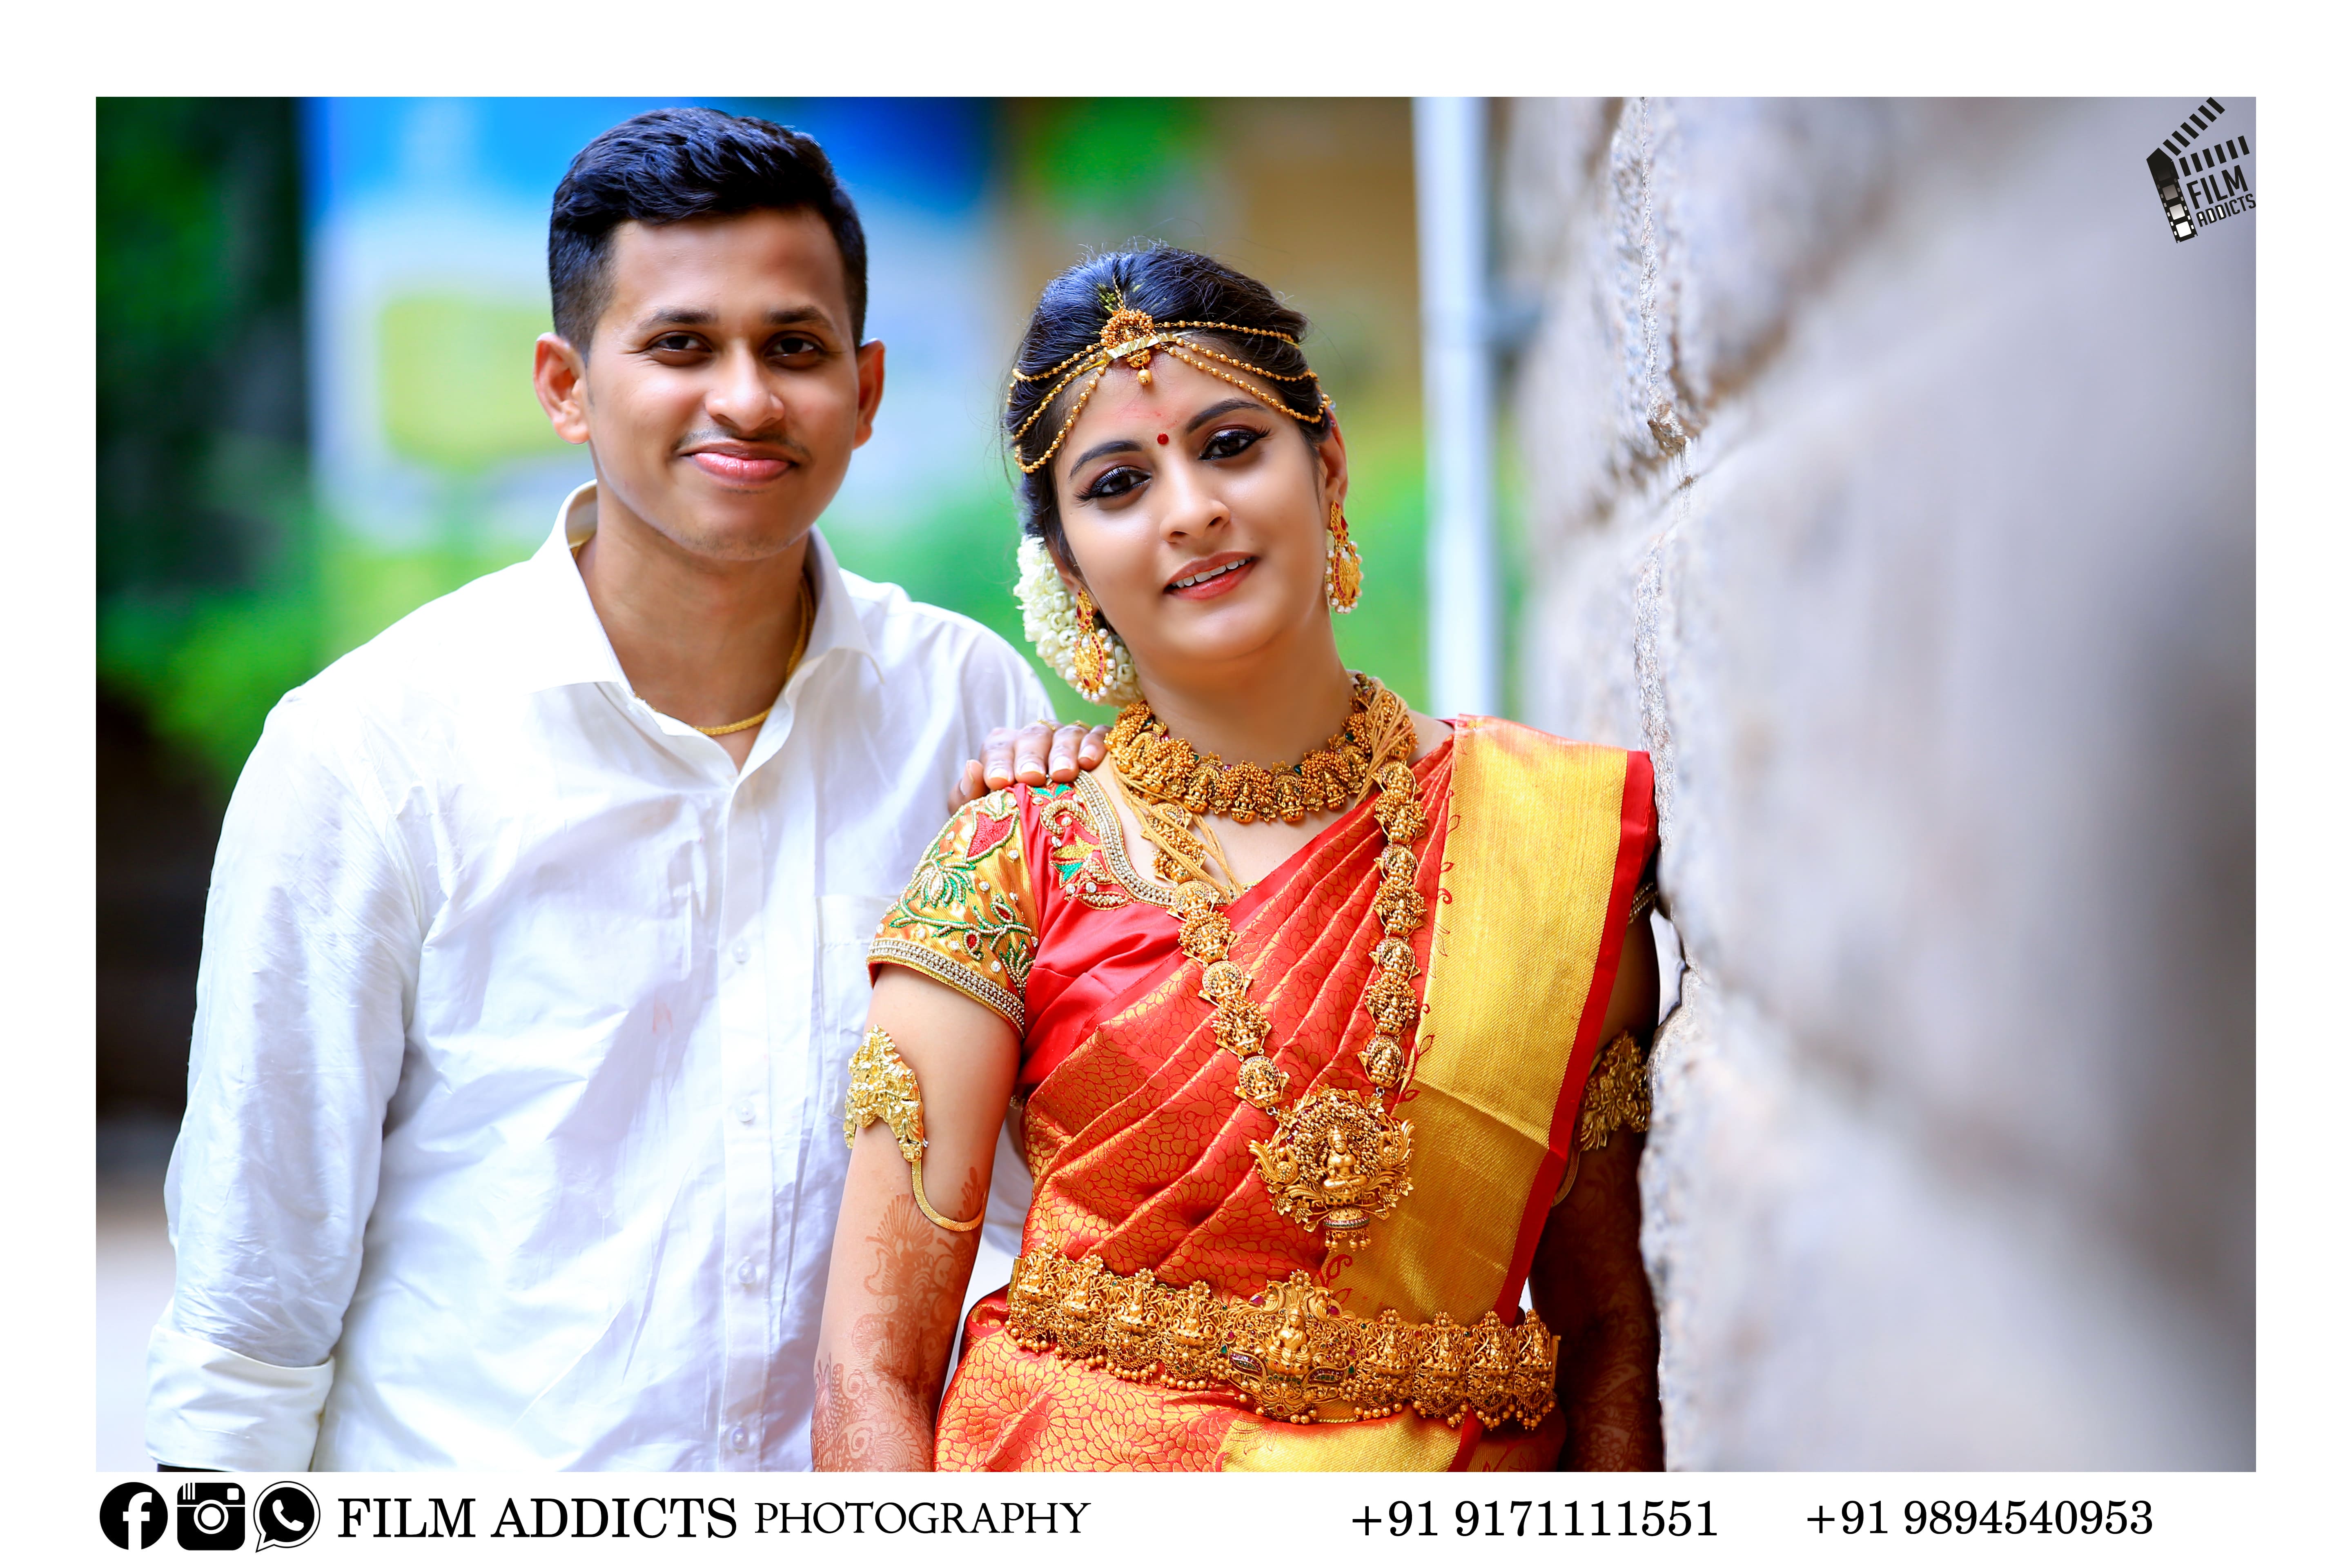 best-wedding-photography-in-theni, best-candid-photographer-theni,candid-photography-in-theni, wedding-candid-photography-in-theni, best-wedding-candid-photography-in-theni,best-candid-photography-theni, candid-photographer-in-theni,photographer-in-theni, helicam-photographer-in-theni, candid-wedding-photographers-in-theni photography-in-theni, professional-wedding-photographers-in-theni, top-wedding-filmmakers-in-theni, wedding-cinematographers-in-theni, wedding-cinimatography-in-theni, wedding-photographers-in-theni, wedding-teaser-in-theni, best-candid-photographer-theni, candid-photographer-in-theni, drone-photographer-in-theni, helicam-photographer-in-theni candid-wedding-photographers-in-andipatti photographers-in-andipatti professional-wedding-photographers-in-andipatti-11 top-wedding-filmmakers-in-theni wedding-cinematographers-in-theni-2 wedding-cinimatography-in-theni wedding-photographers-in-theni wedding-teaser-in-andipattiasian-wedding-photography-in-theni best-candid-photographers-in-theni best-candid-videographers-in-theni best-photographers-in-theni best-wedding-photographers-in-theni best-nadar-wedding-photography-in-theni candid-photographers-in-theni-2 destination-wedding-photographers-in-theni fashion-photographers-in-theni theni-famous-stage-decorations